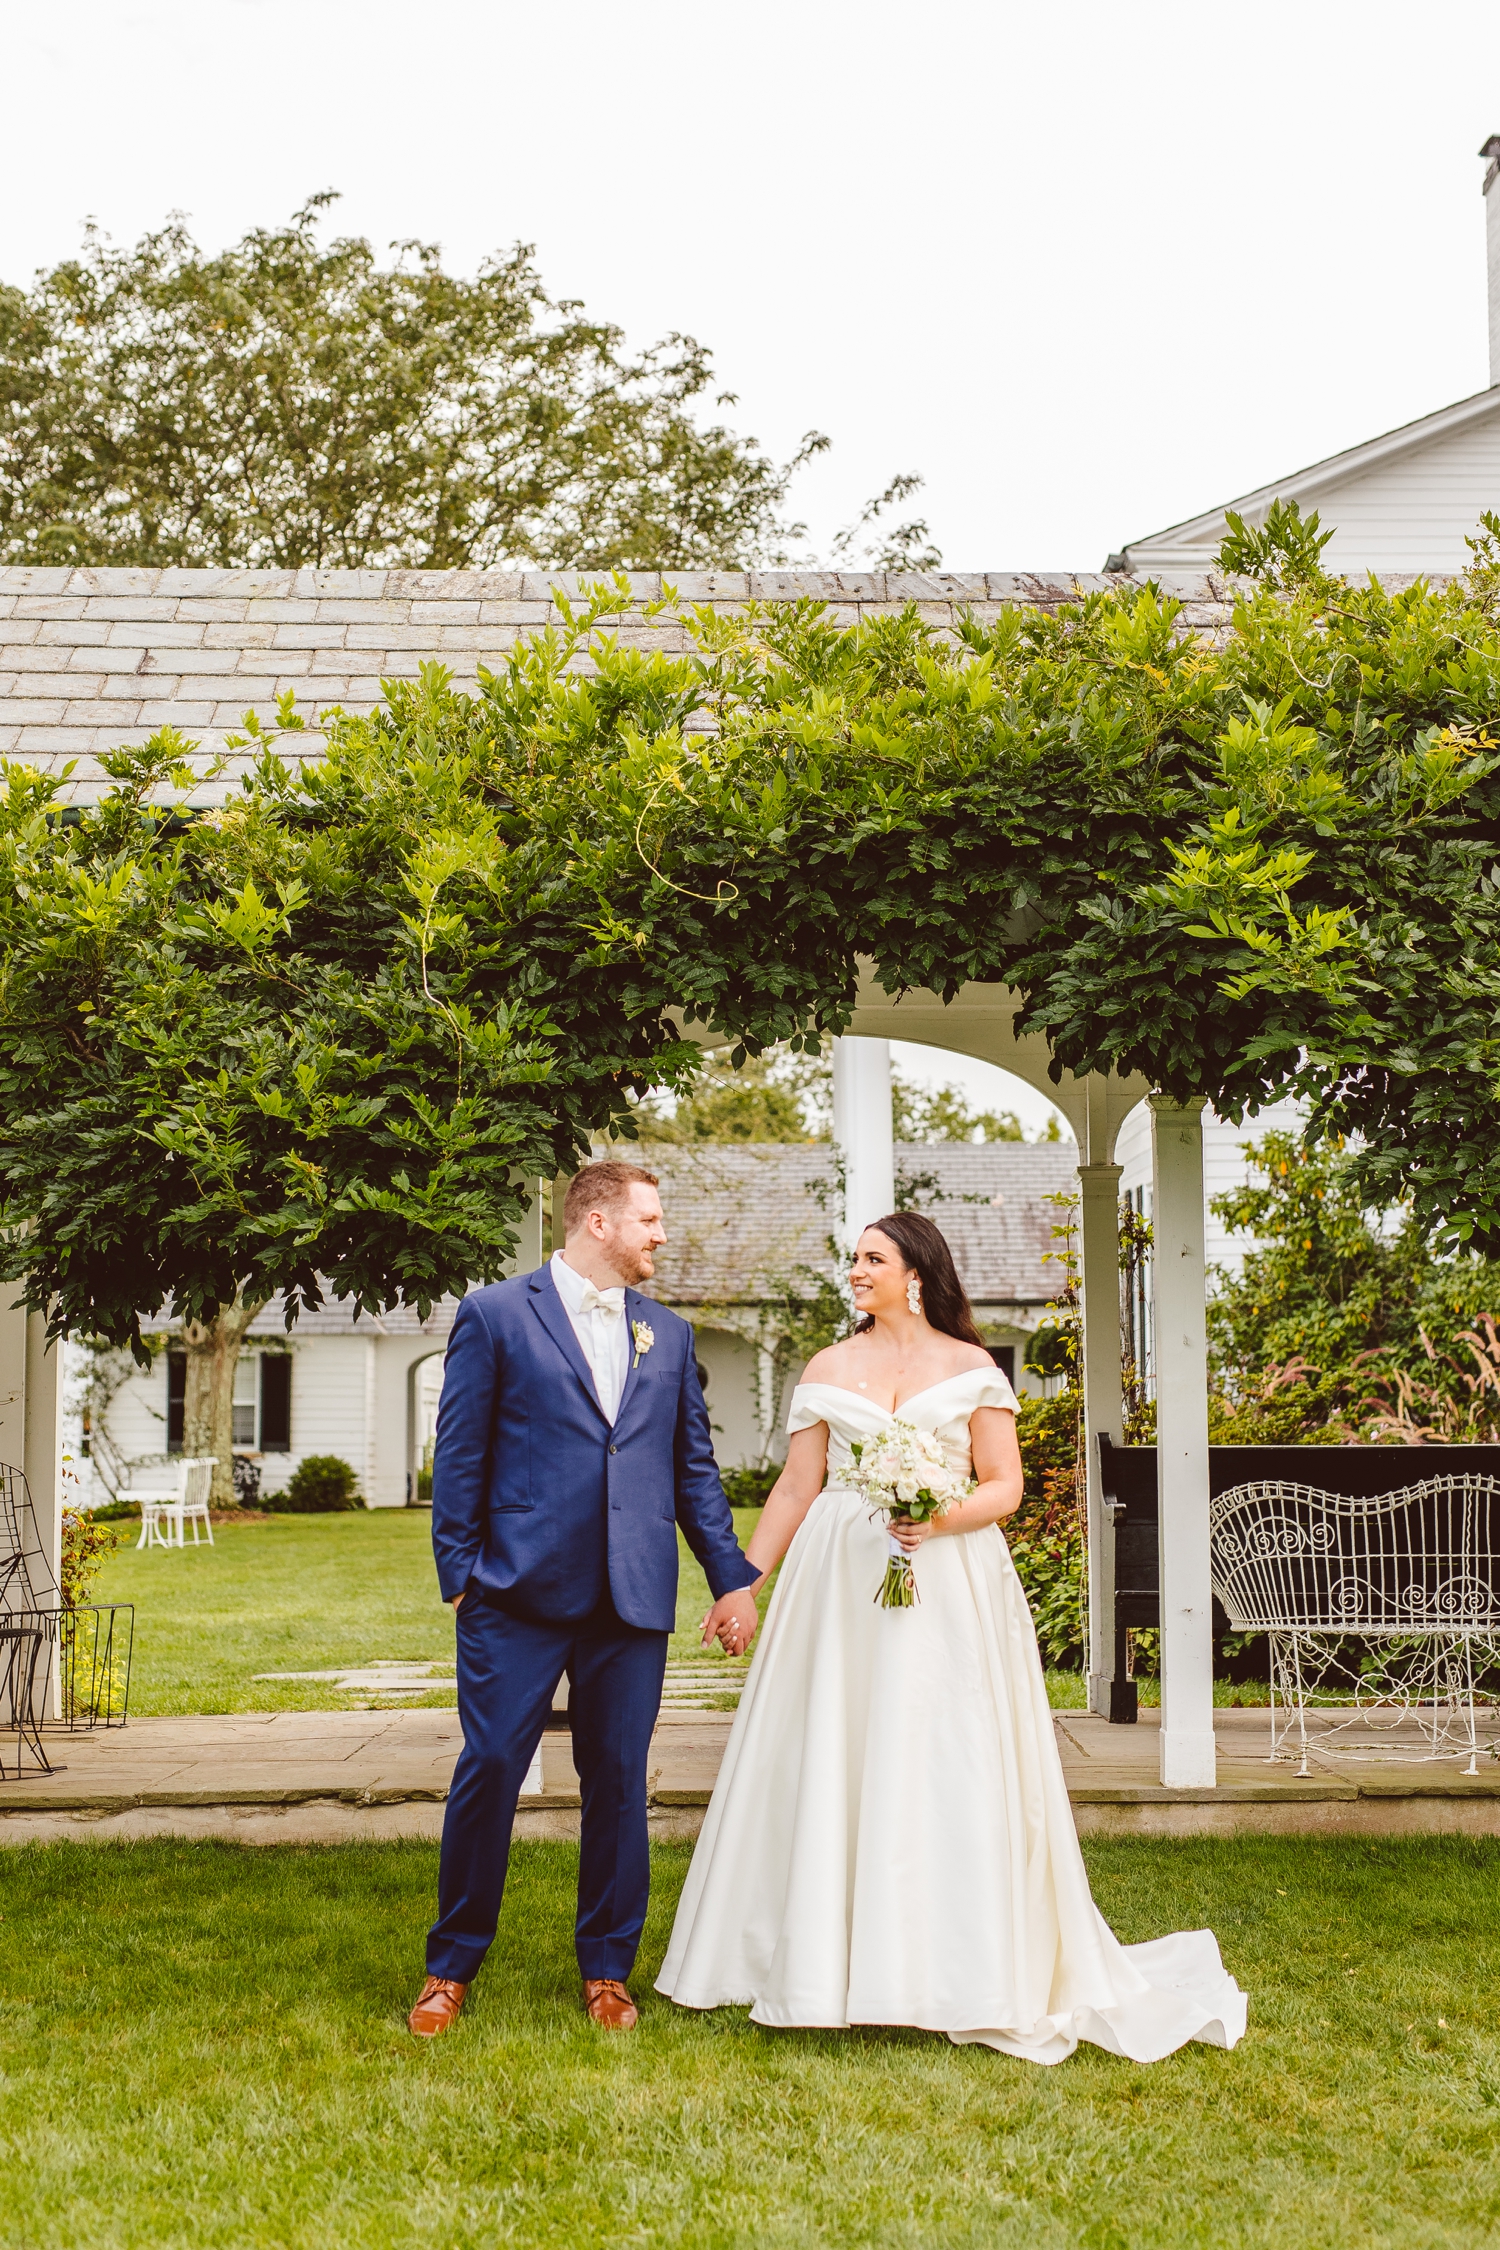 Bride and groom standing in Ladew Topiary Gardens while holding hands | Brooke Michelle Photo